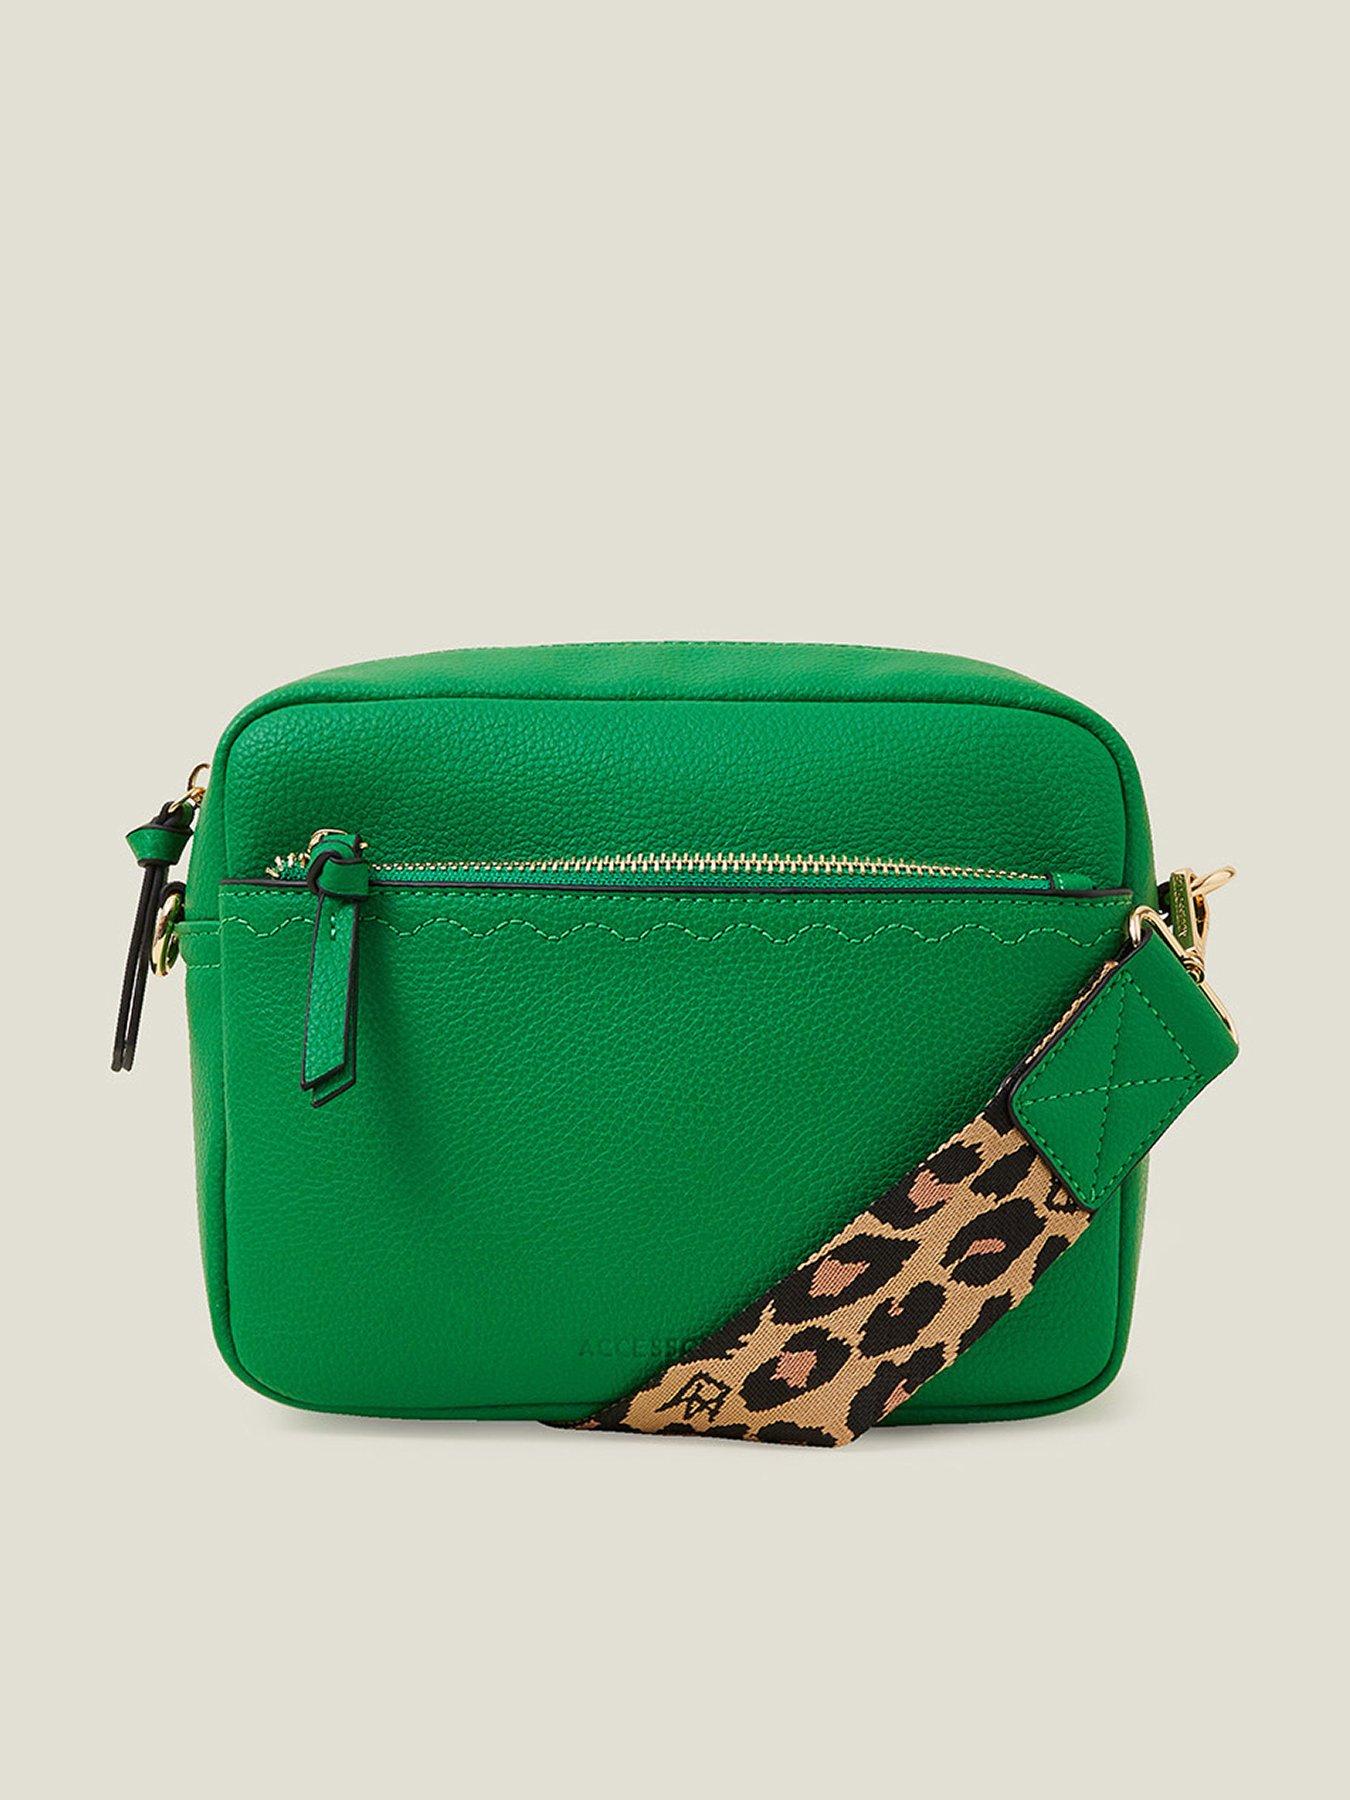 Emerald Green Purse | Stylish Clutch for Any Occasion